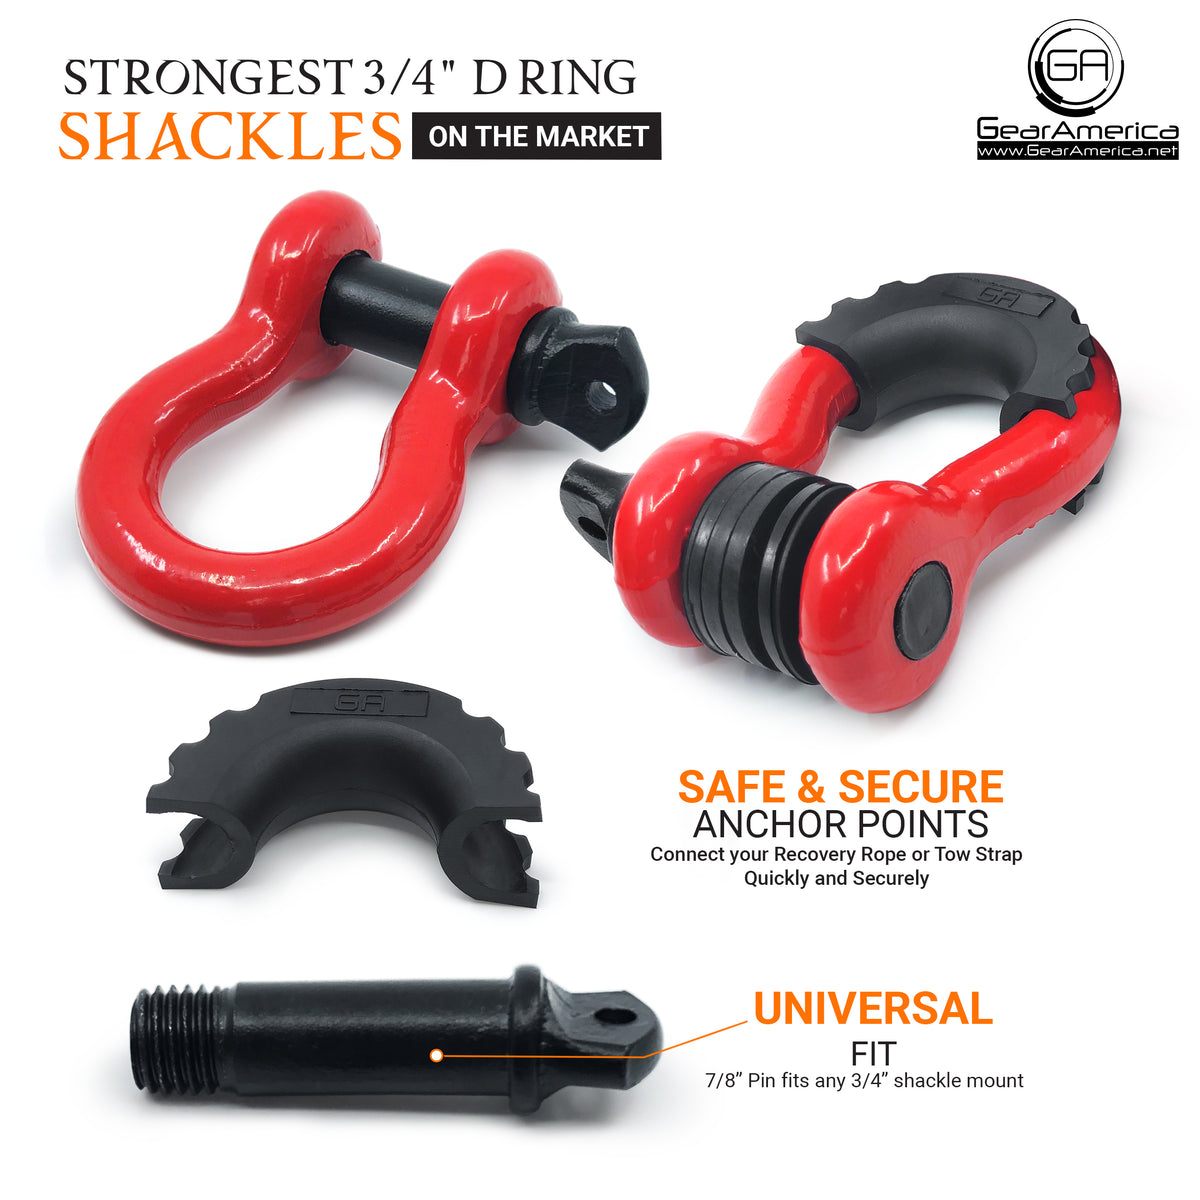 2 Ton Small jamgoer 2 Pcs D Ring Shackle 1/2 Off Road Shackles 4409 lbs Break Strength Heavy Duty Rugged D-Ring with Clevis Pin for Vehicle Recovery Battery Marine Automotive RV Car Truck 